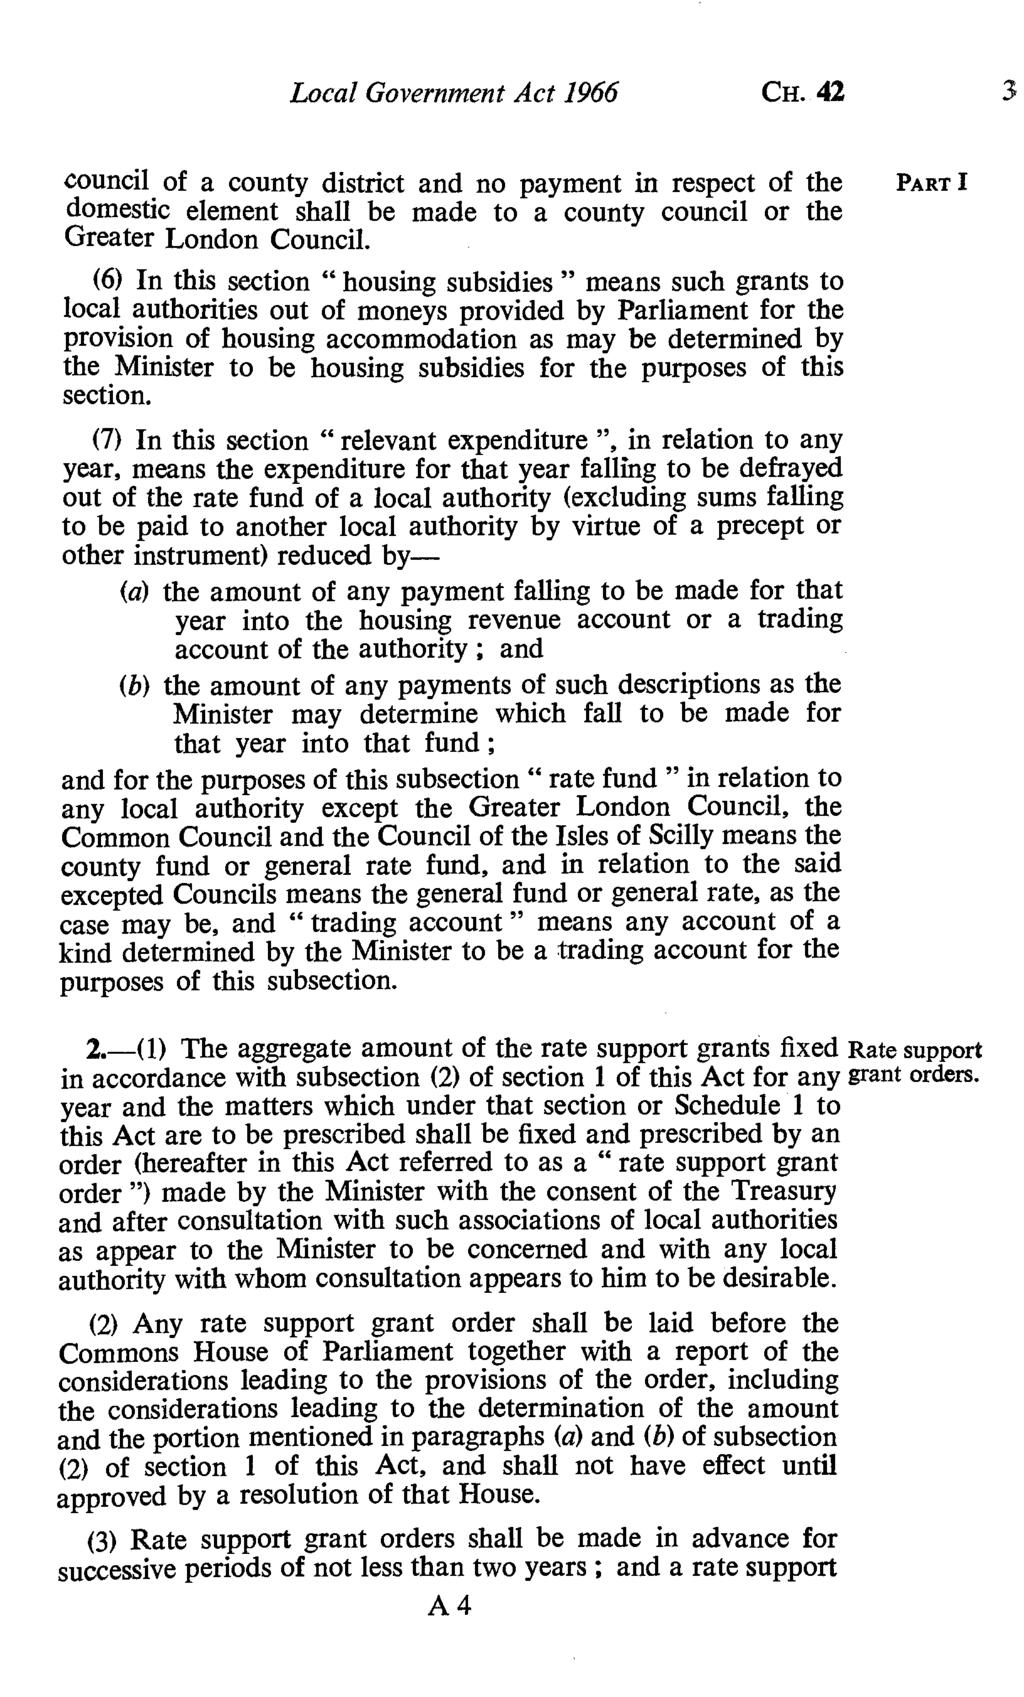 Local Government Act 1966 CH. 42 3 council of a county district and no payment in respect of the domestic element shall be made to a county council or the Greater London Council.